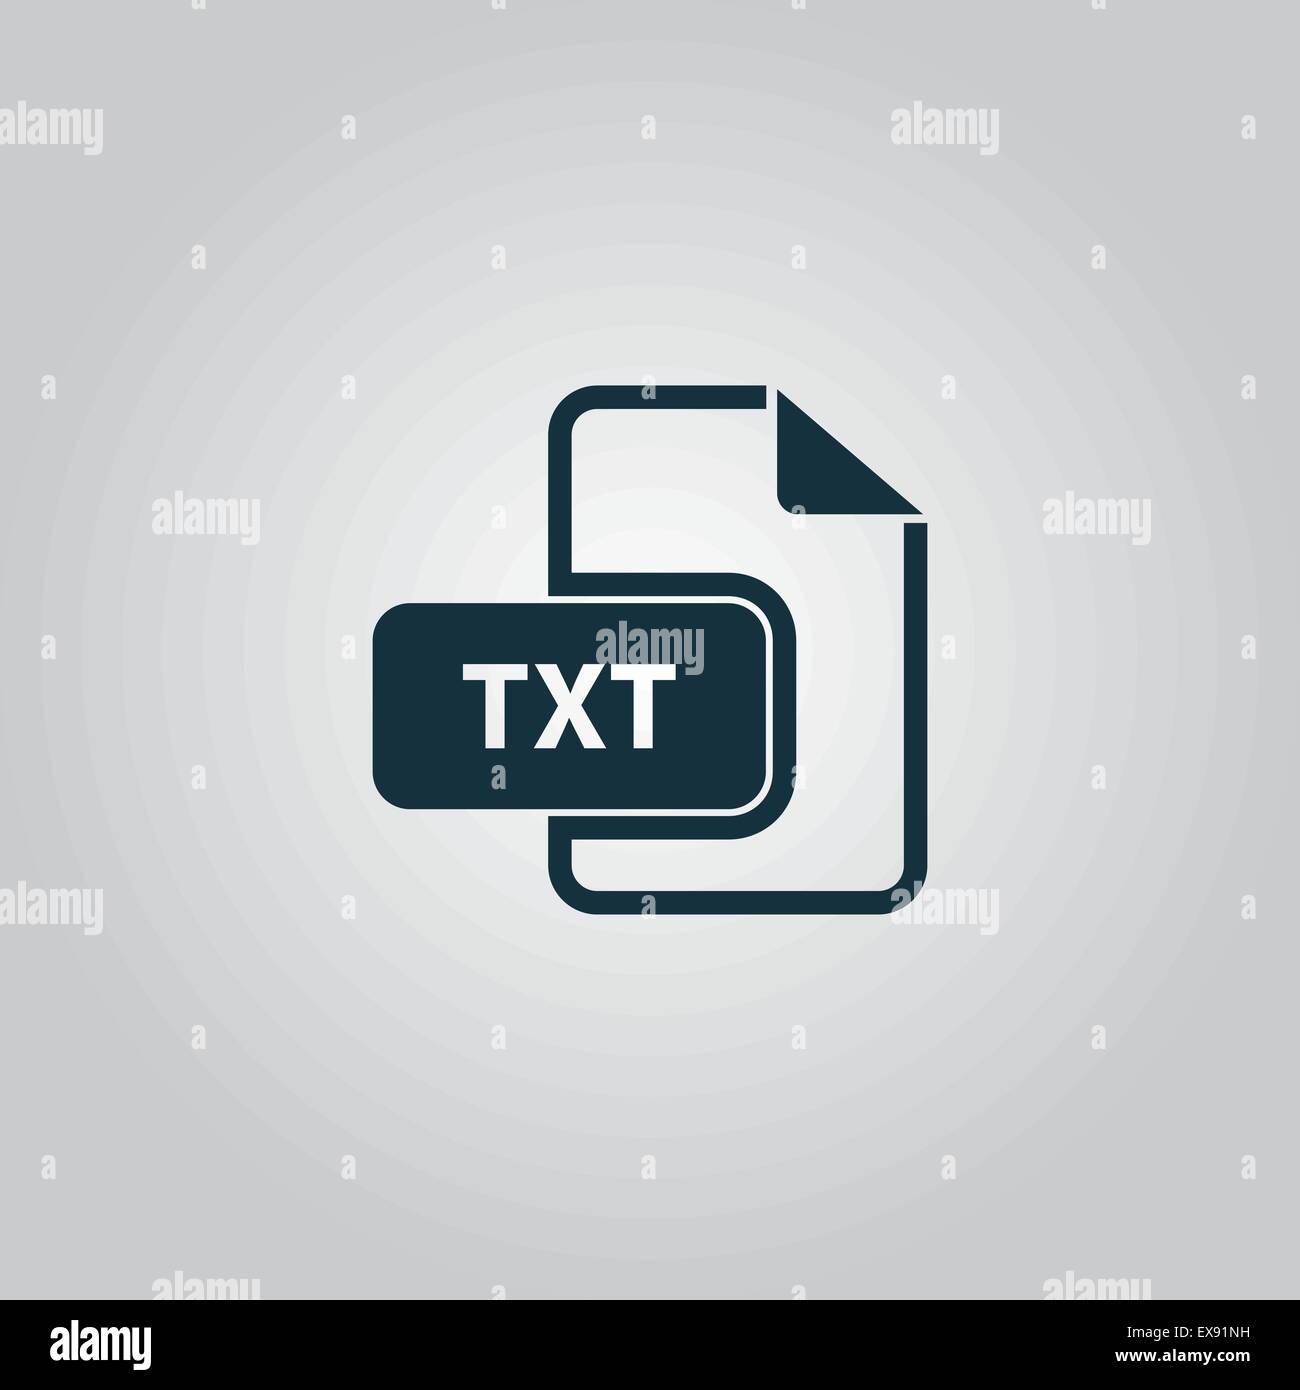 TXT text file extension icon. Stock Vector